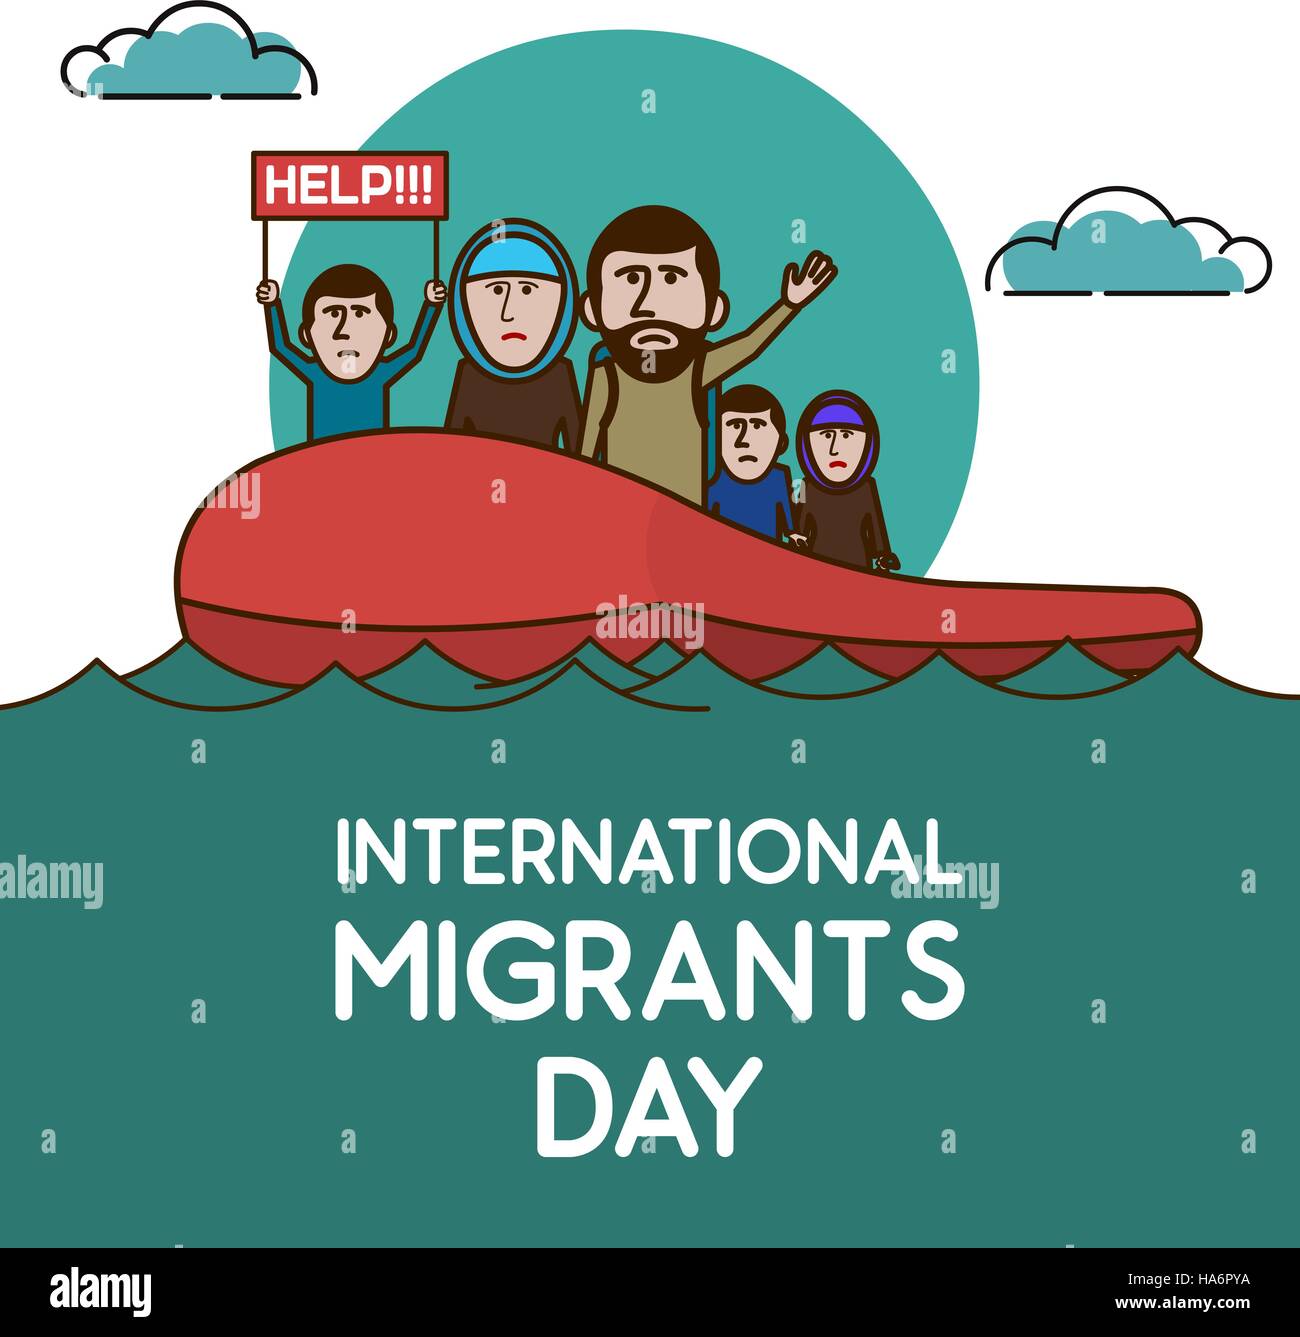 Refugees on the boat in open ocean. Help Us. International migrants day. Vector illustration. Stock Vector